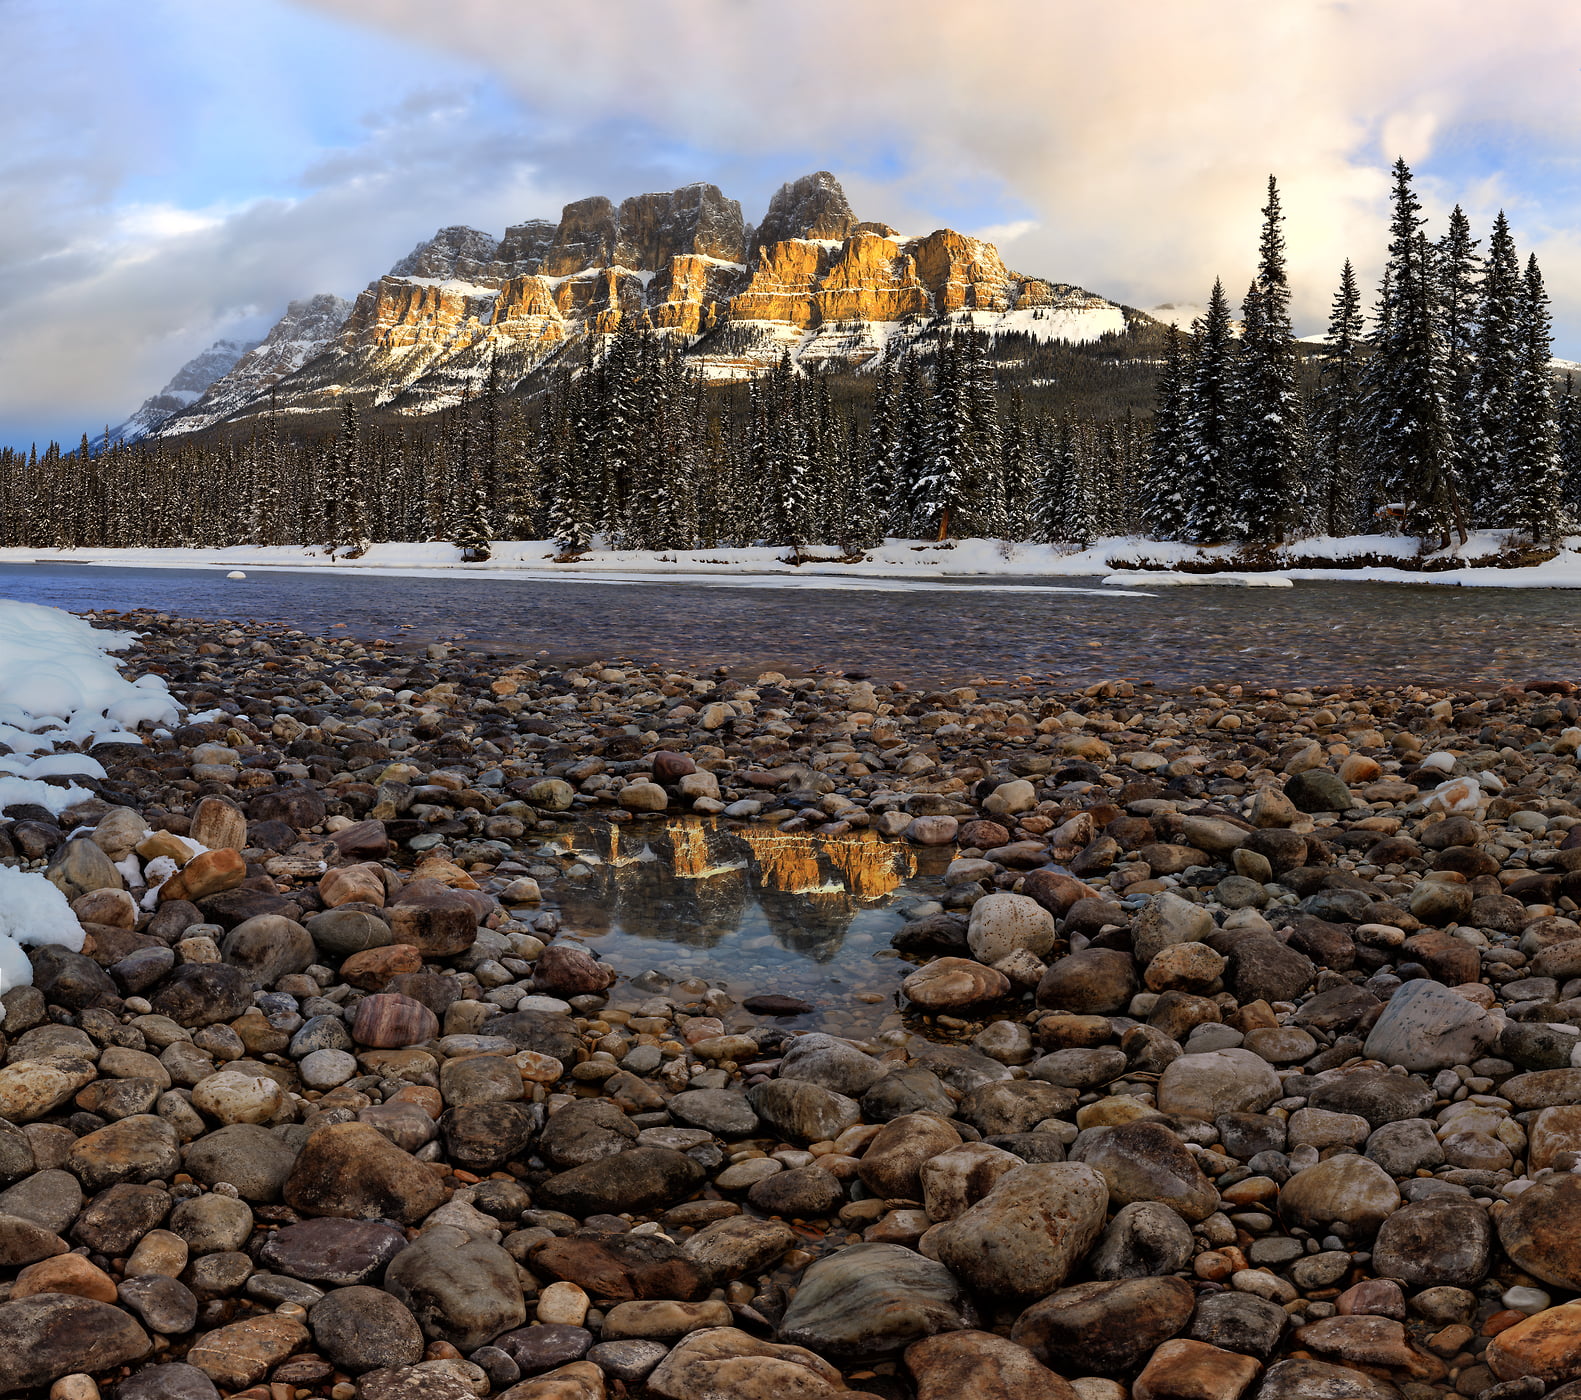 1,123 megapixels! A very high resolution, large-format VAST photo print of a stream with rocks on the side, backdropped by a snowy forest and large mountain range with Castle Mountain; landscape photograph created by Scott Dimond in Banff National Park, Alberta, Canada.